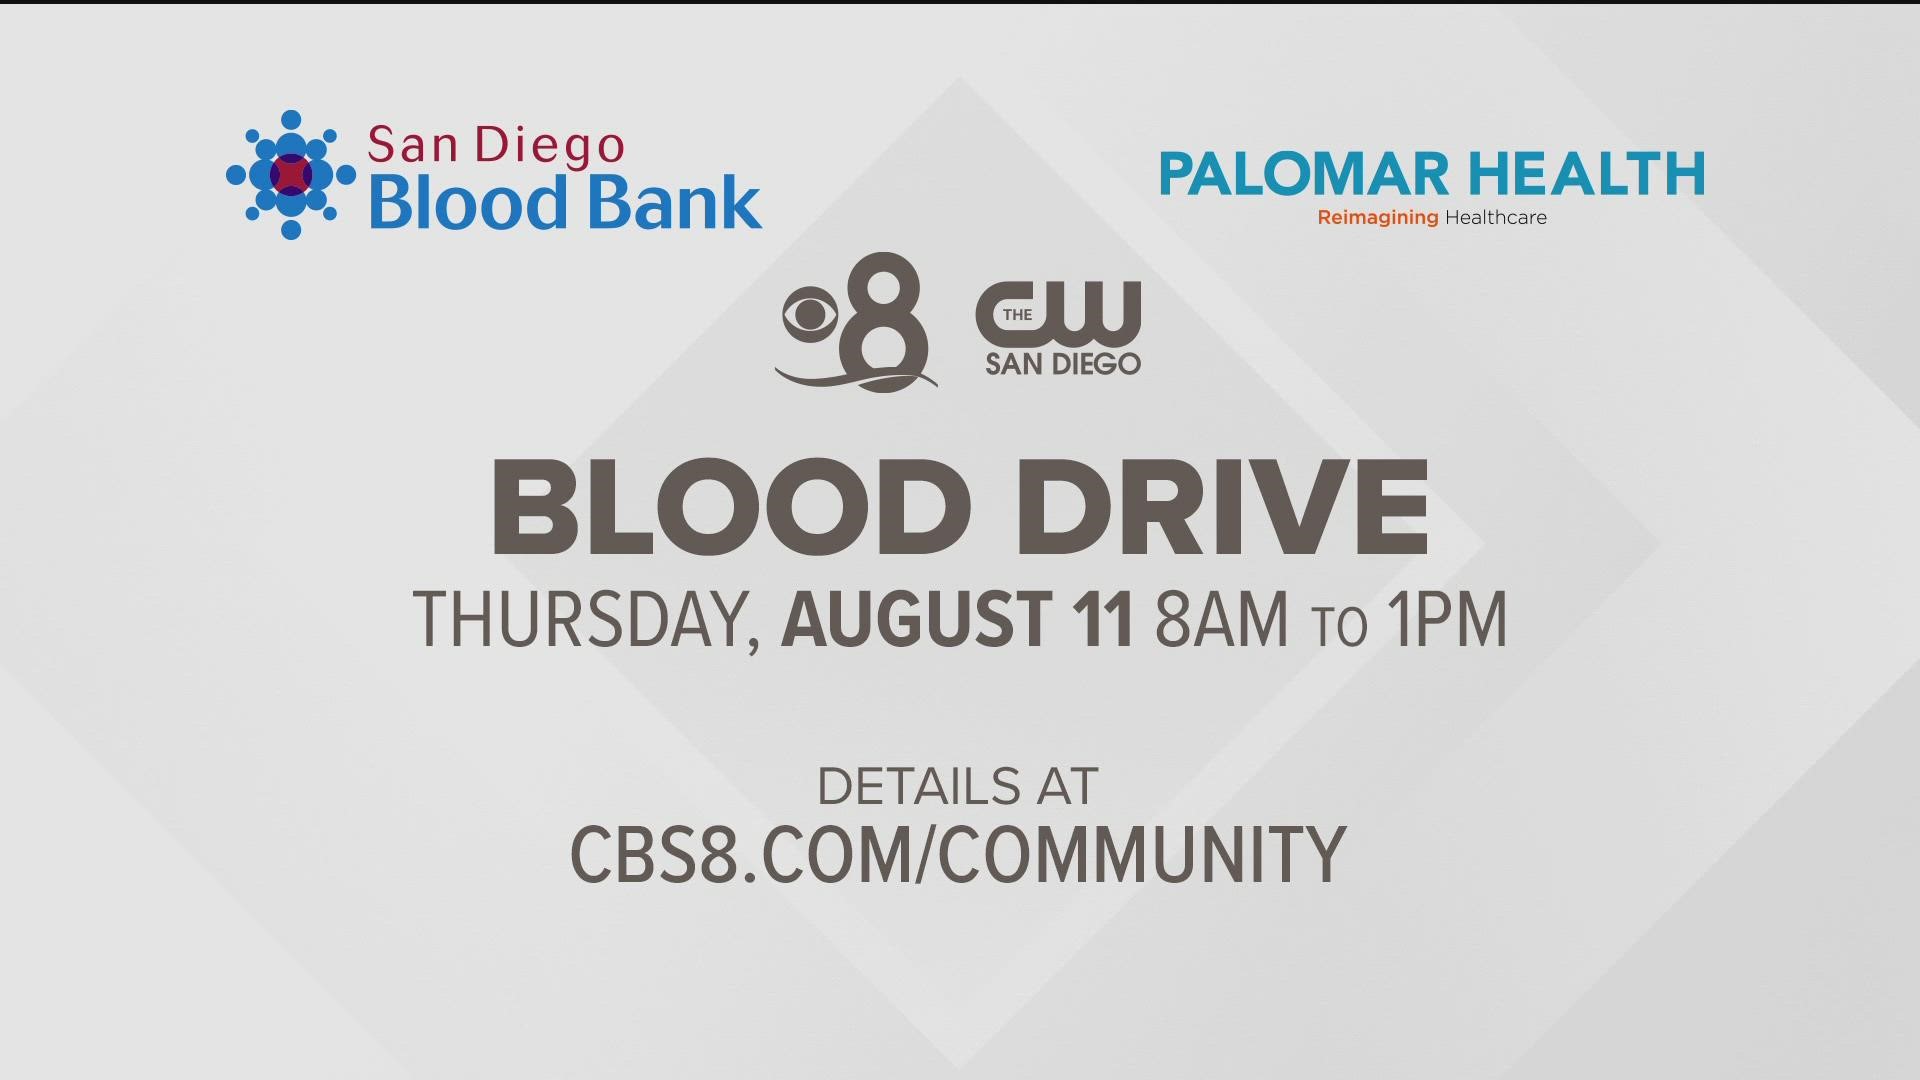 One pint of donated blood can save up to 3 lives and your donation will go toward helping San Diegans get the blood they need. Visit: www.sandiegobloodbank.org